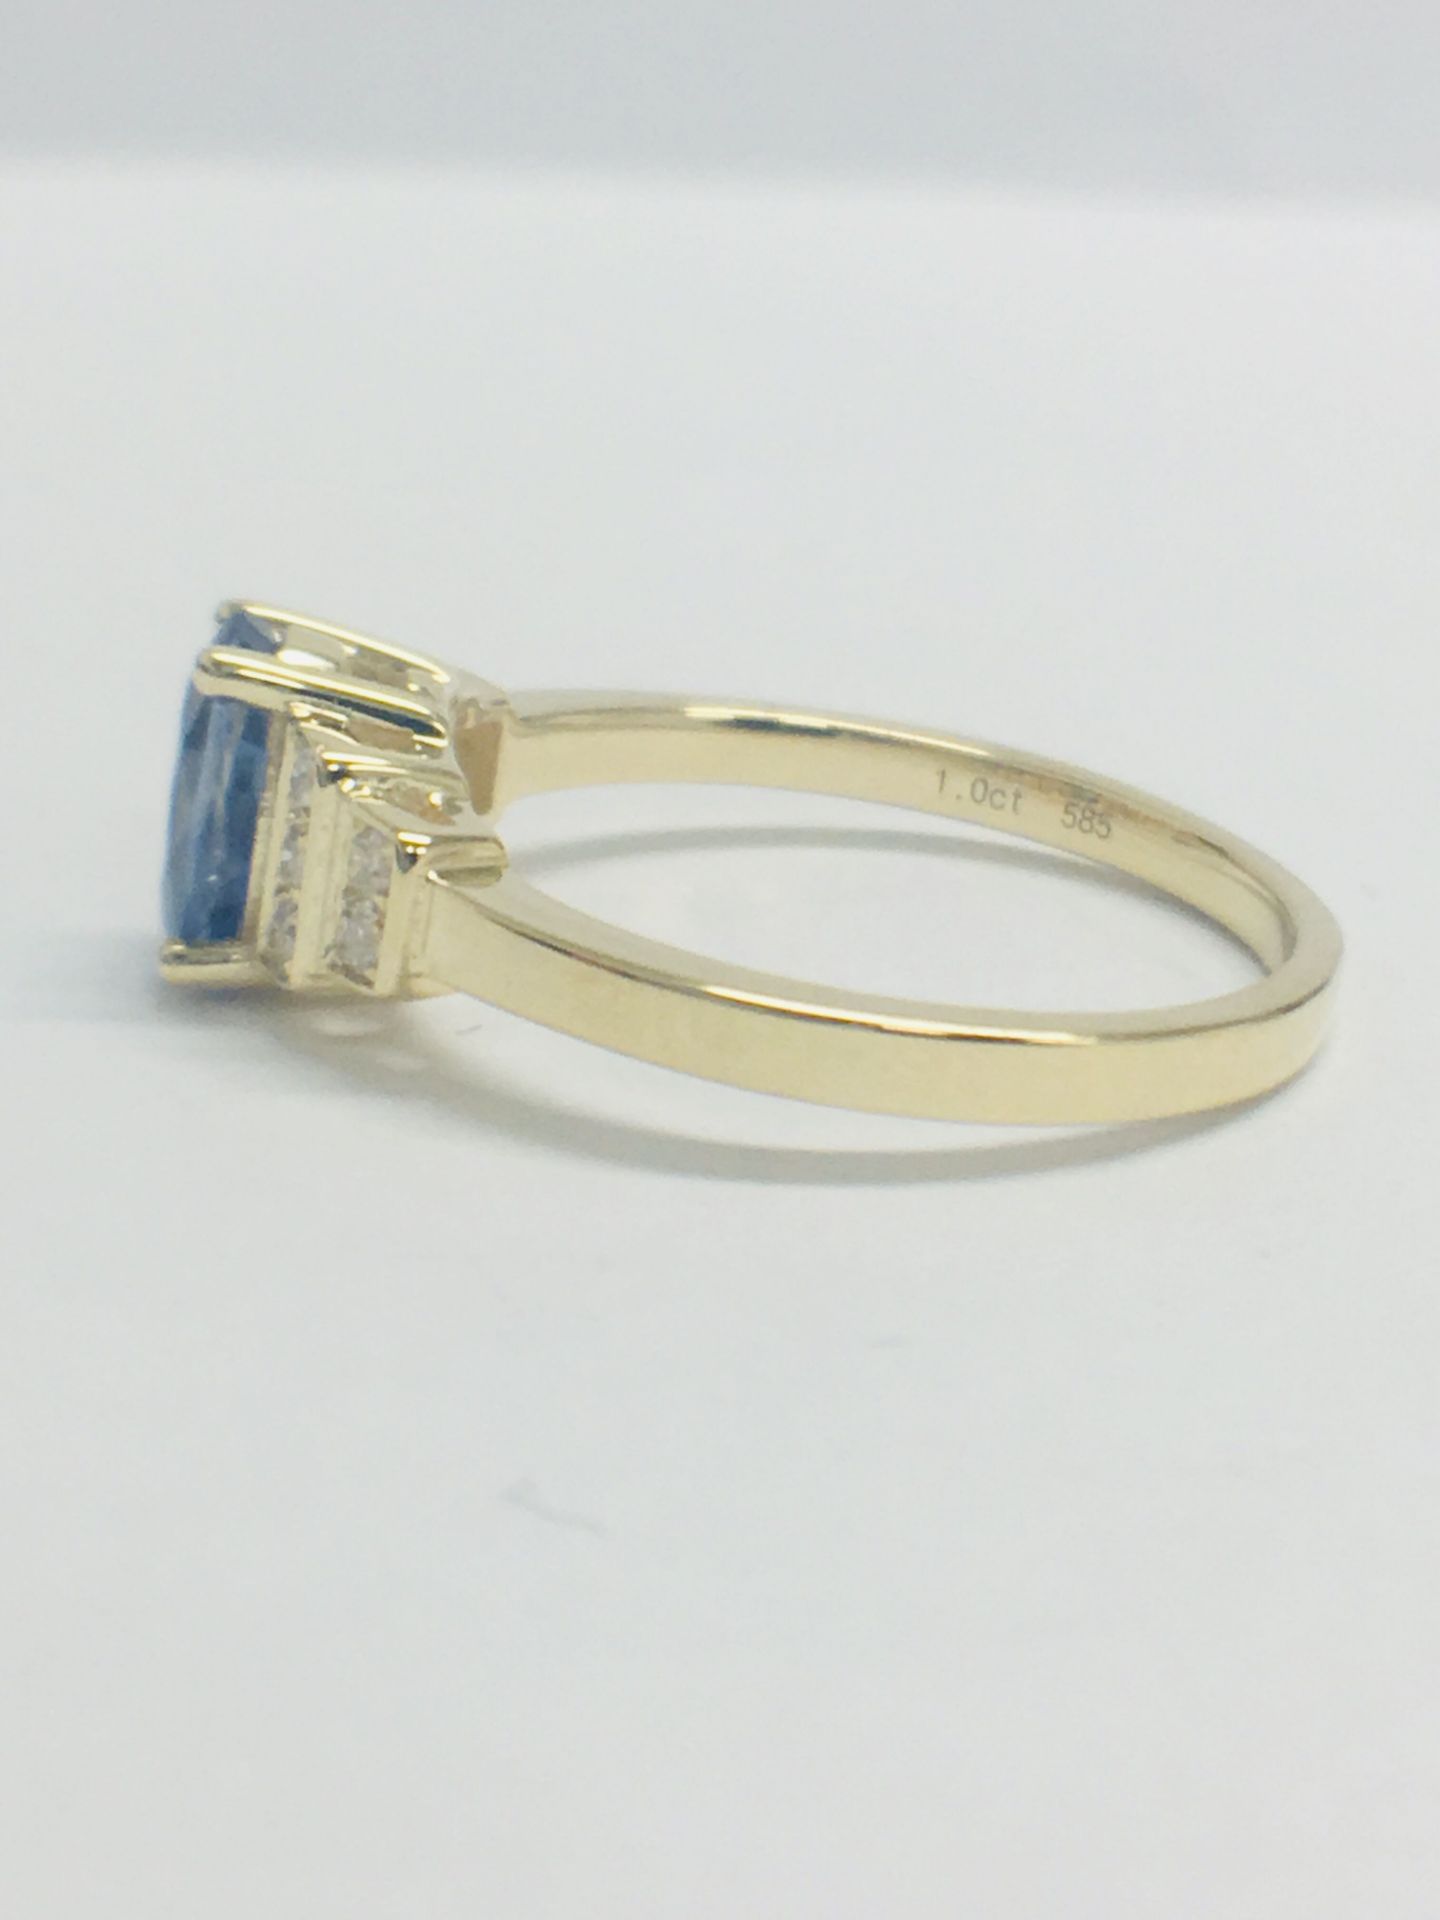 14ct Yellow Gold Sapphire and Diamond Ring. - Image 3 of 10